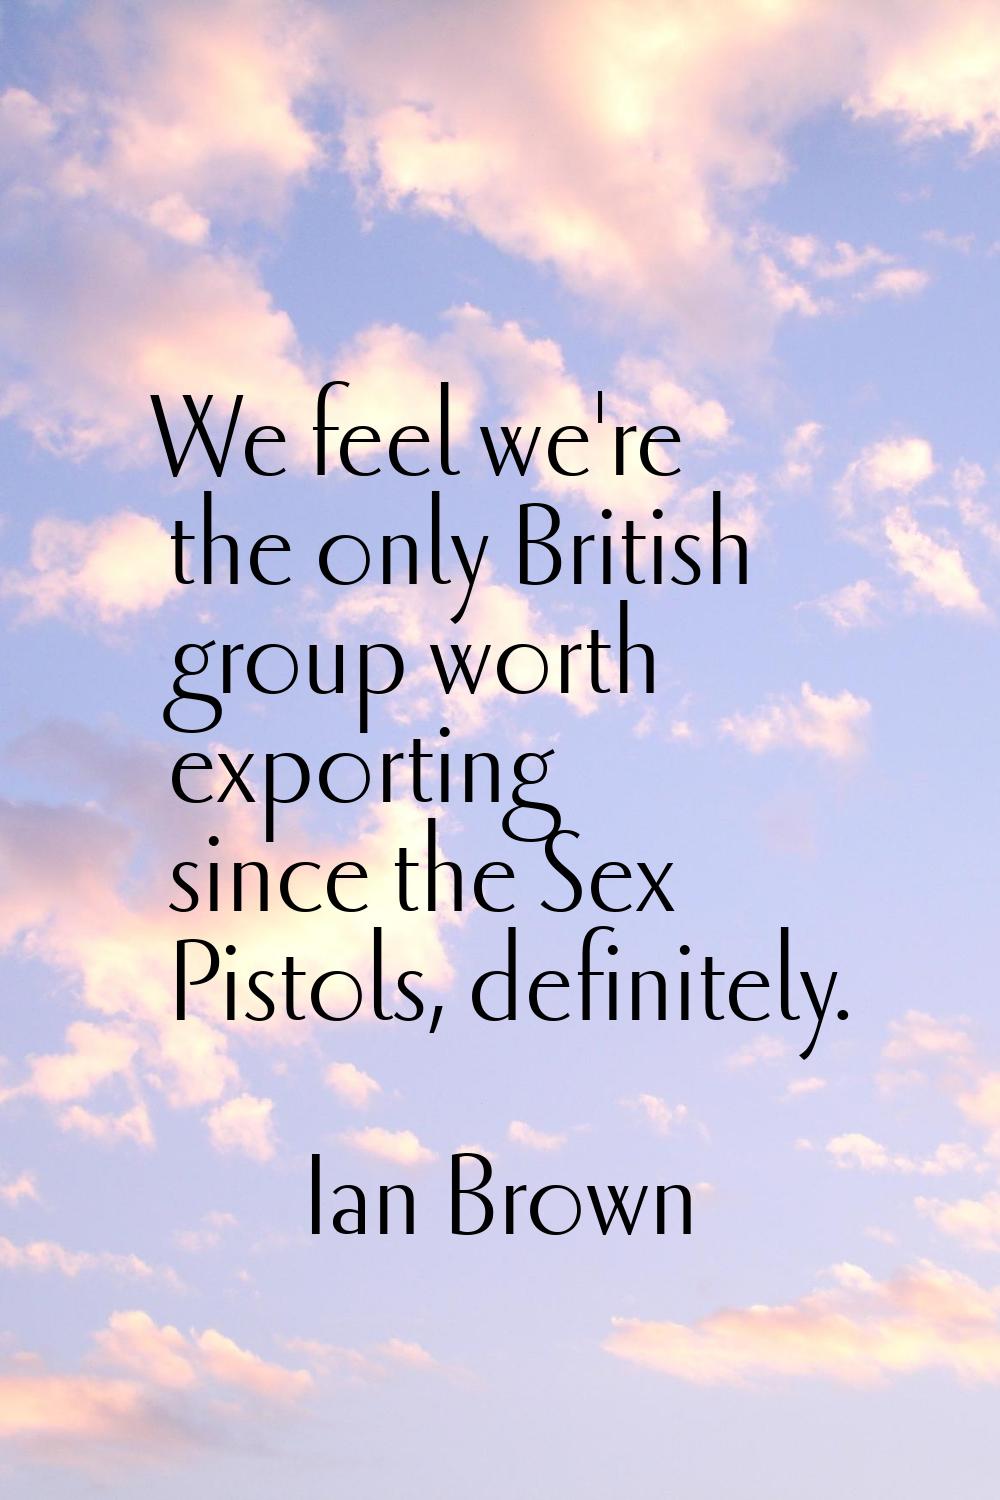 We feel we're the only British group worth exporting since the Sex Pistols, definitely.